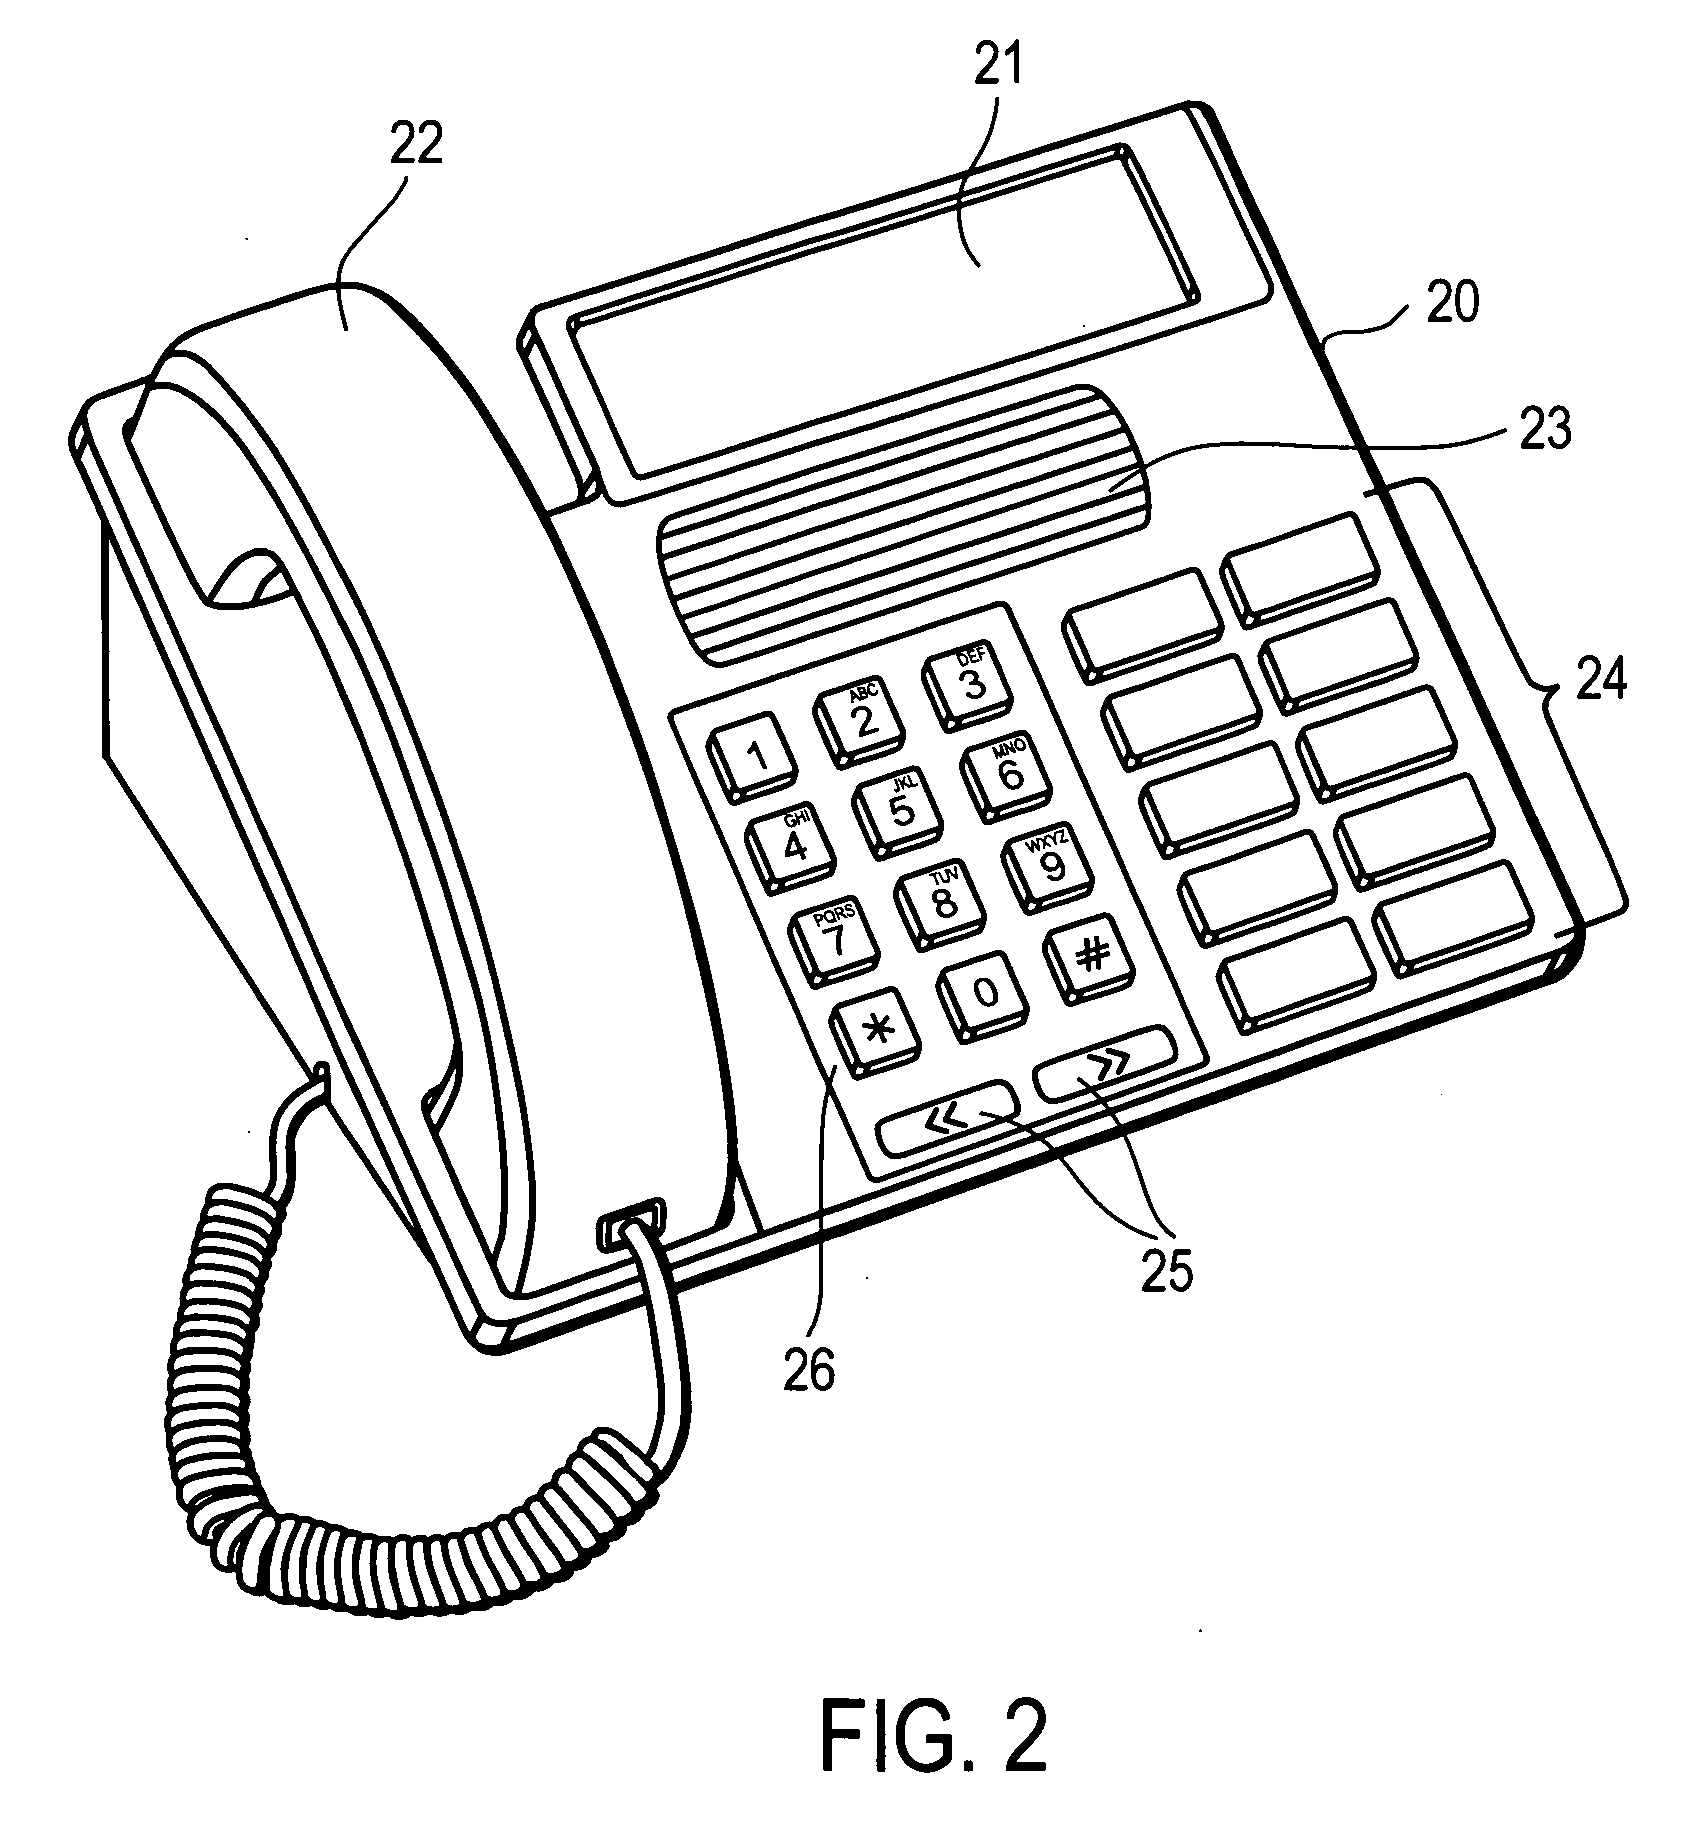 Randomized digit prompting for an interactive voice response system